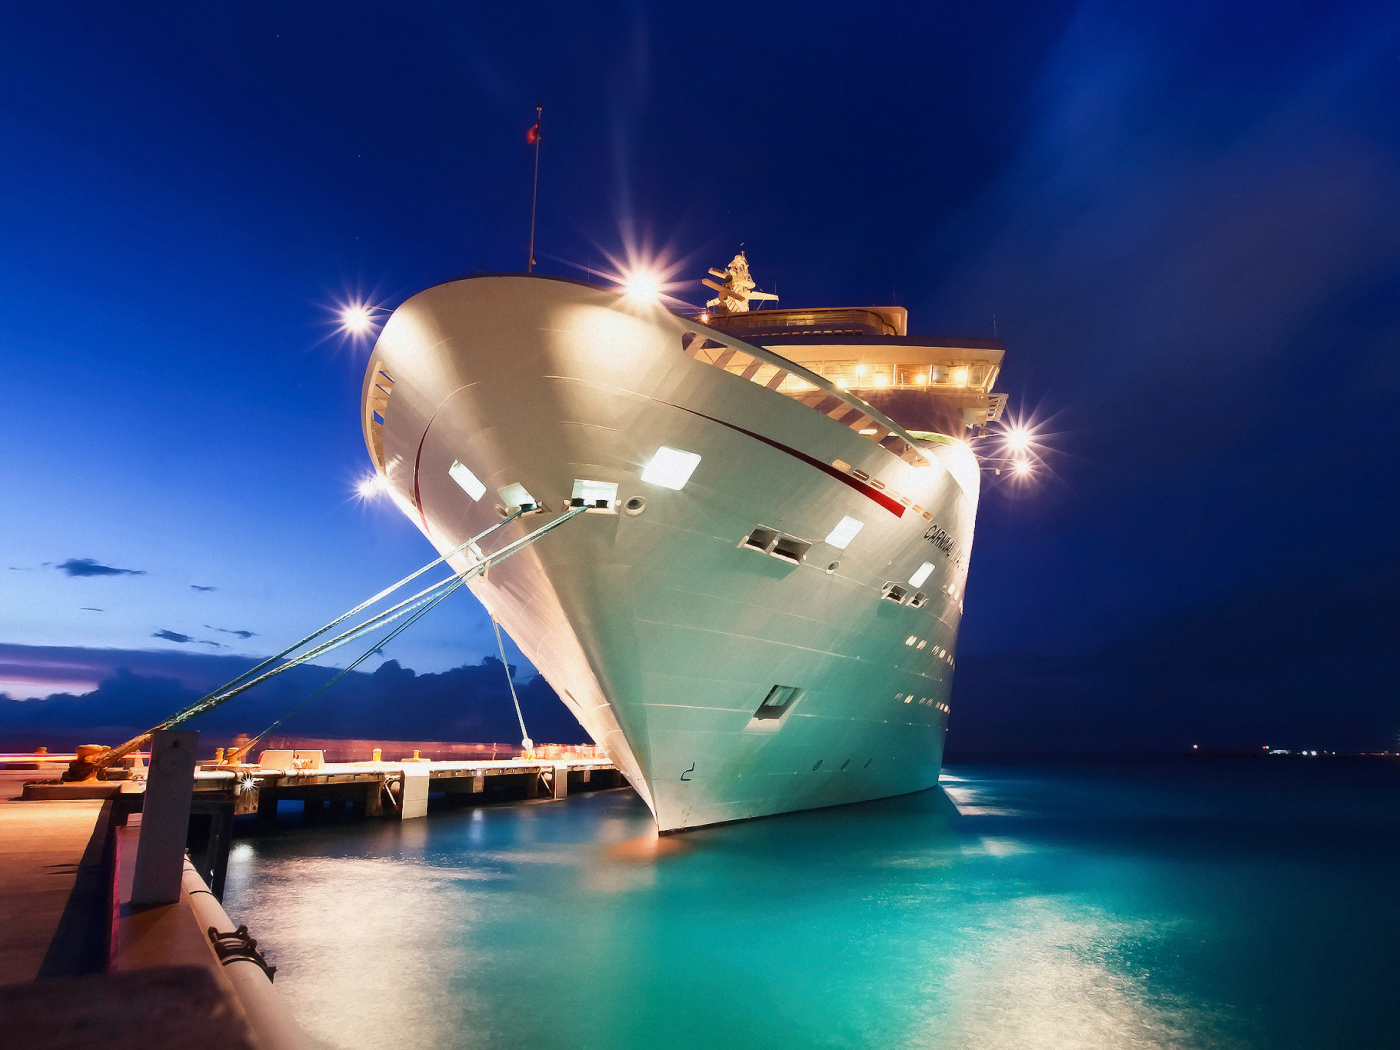 Cruise ship berth in the evening